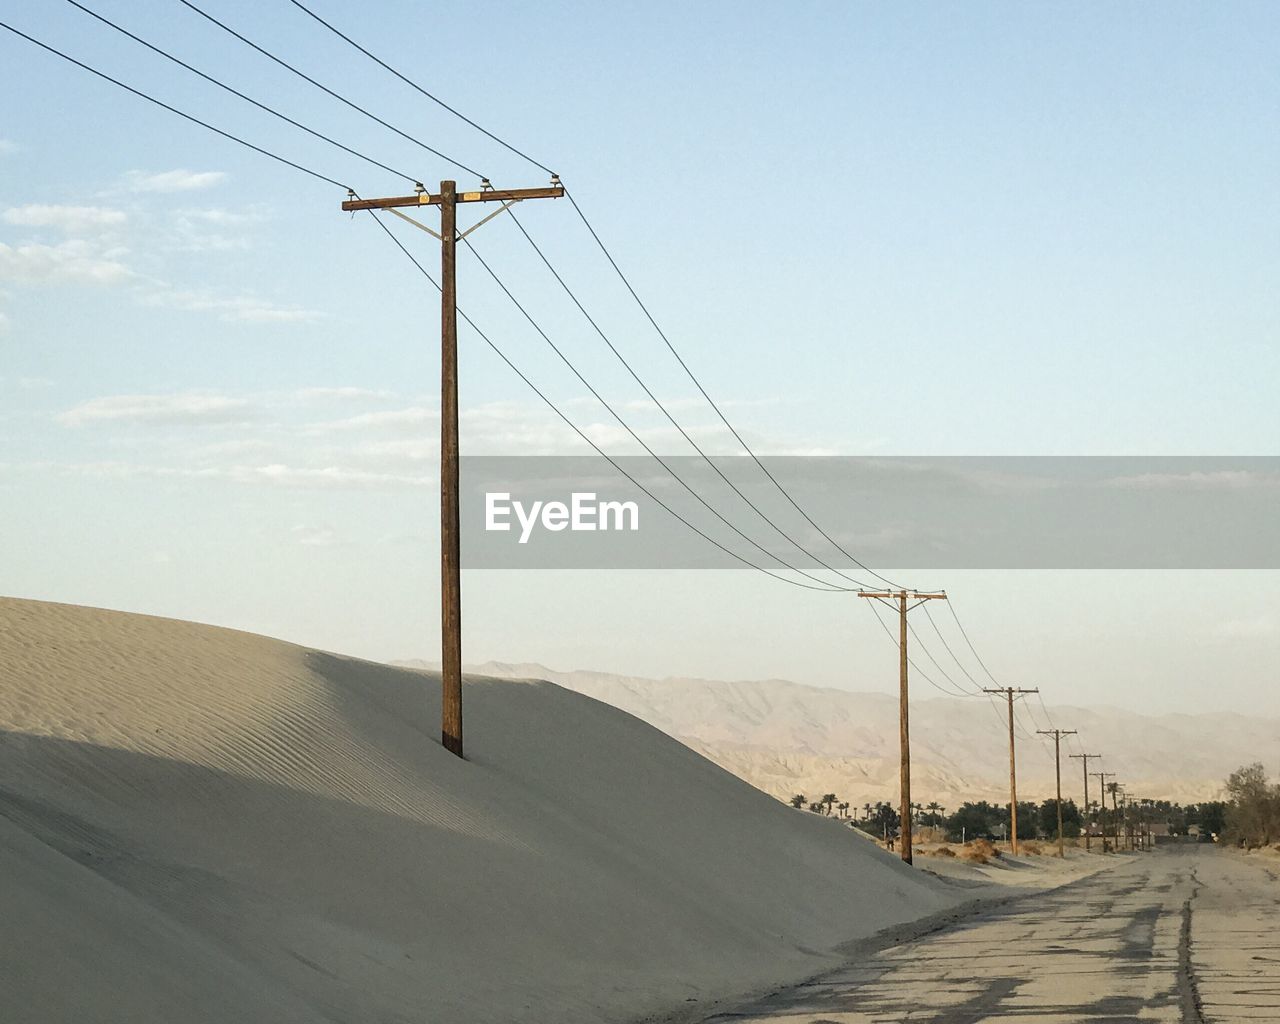 Sand dunes and power lines along a desert road